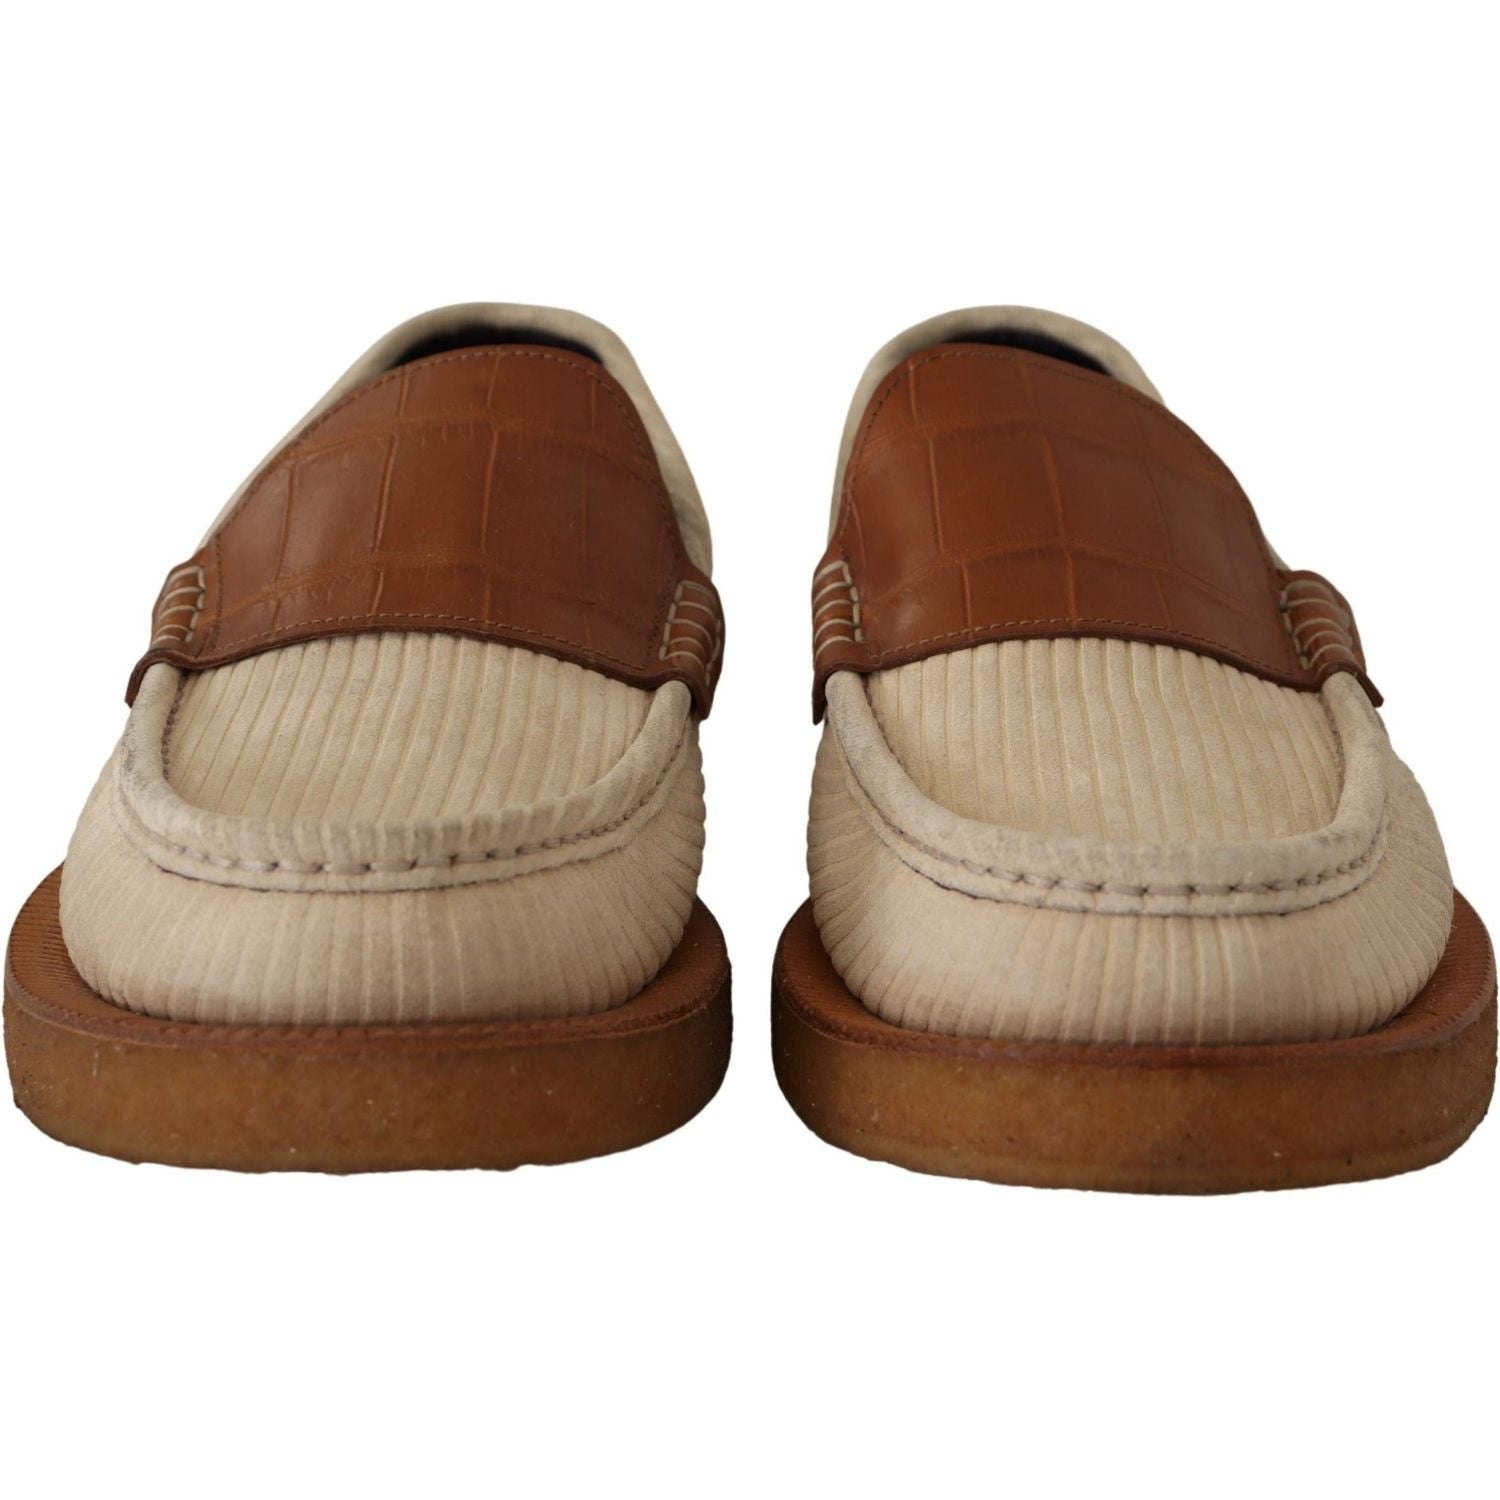 Dolce & Gabbana | White Brown Fox Moccasins Loafers Shoes | McRichard Designer Brands